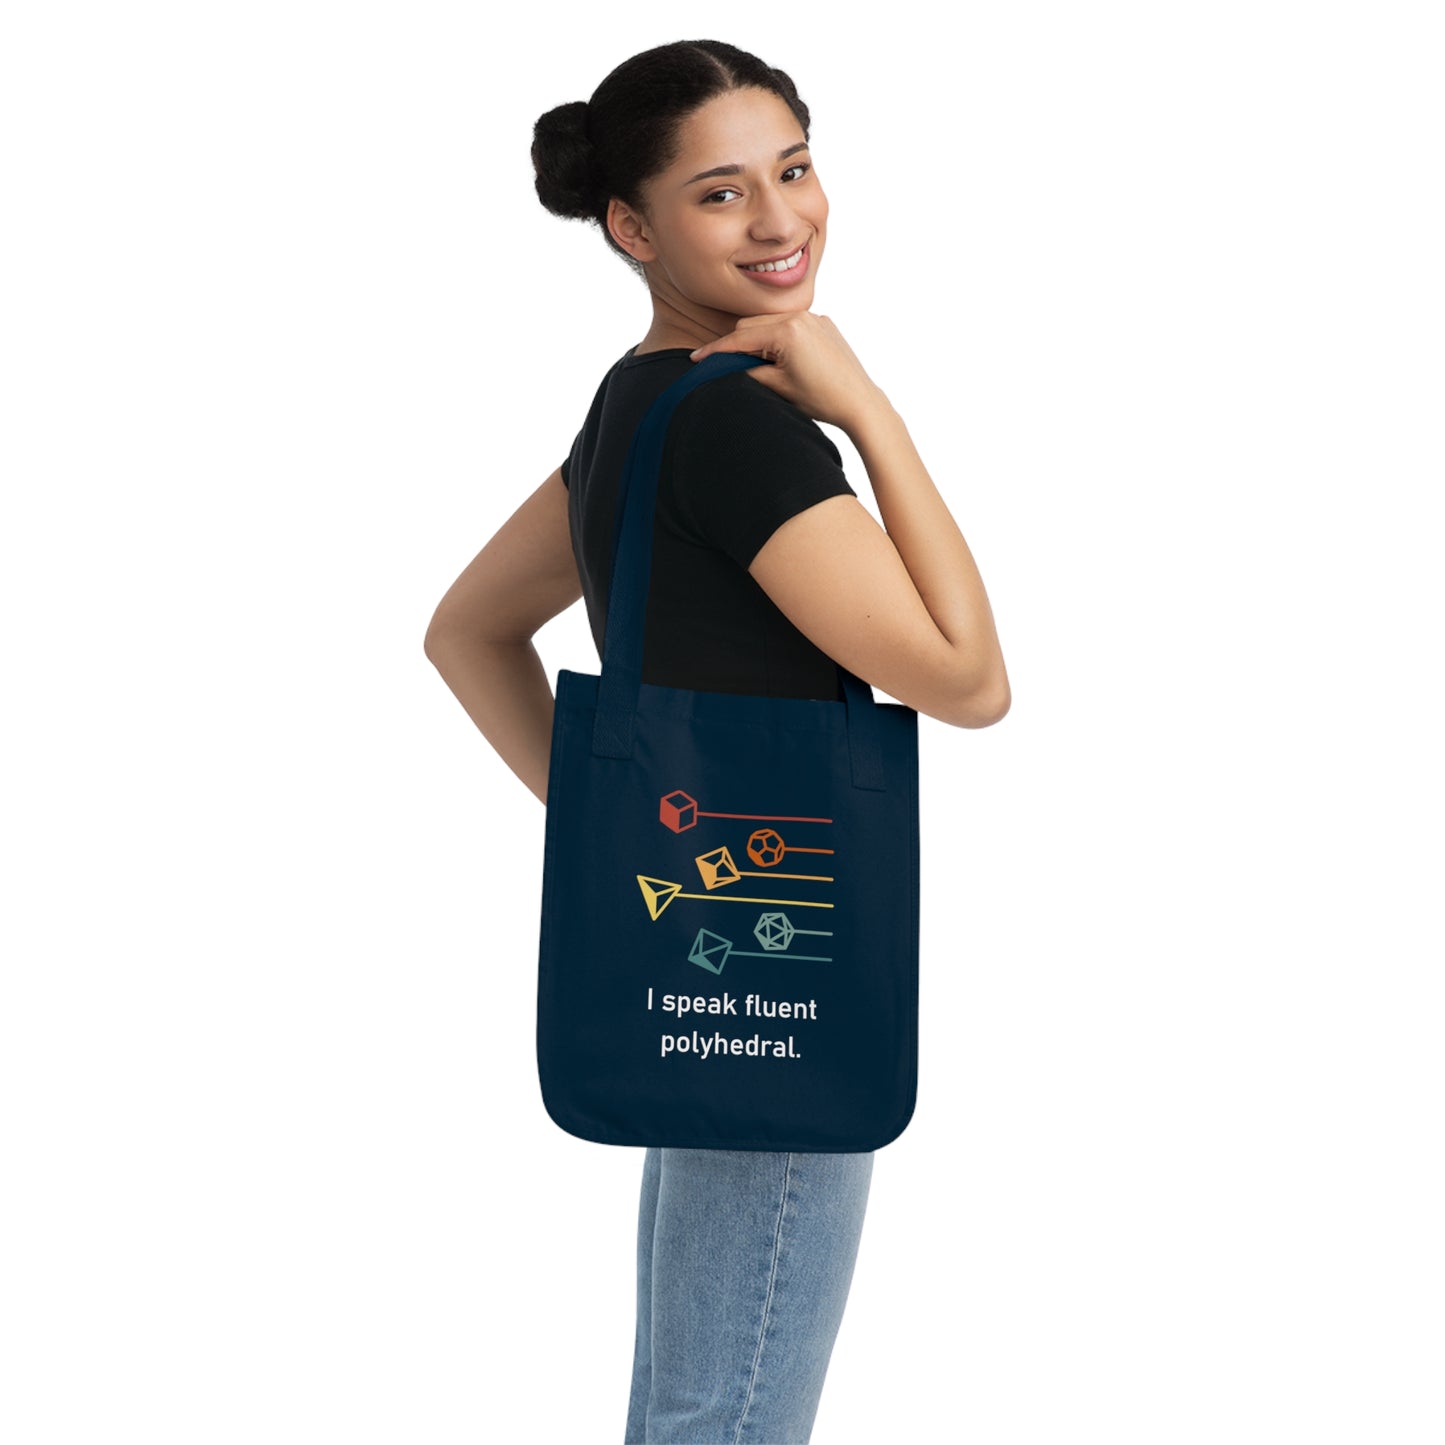 I Speak Fluent Polyhedral Organic Canvas Tote Bag, D&D Tote, DnD Bag of Holding, Eco-friendly Tote, Double-Sided Print